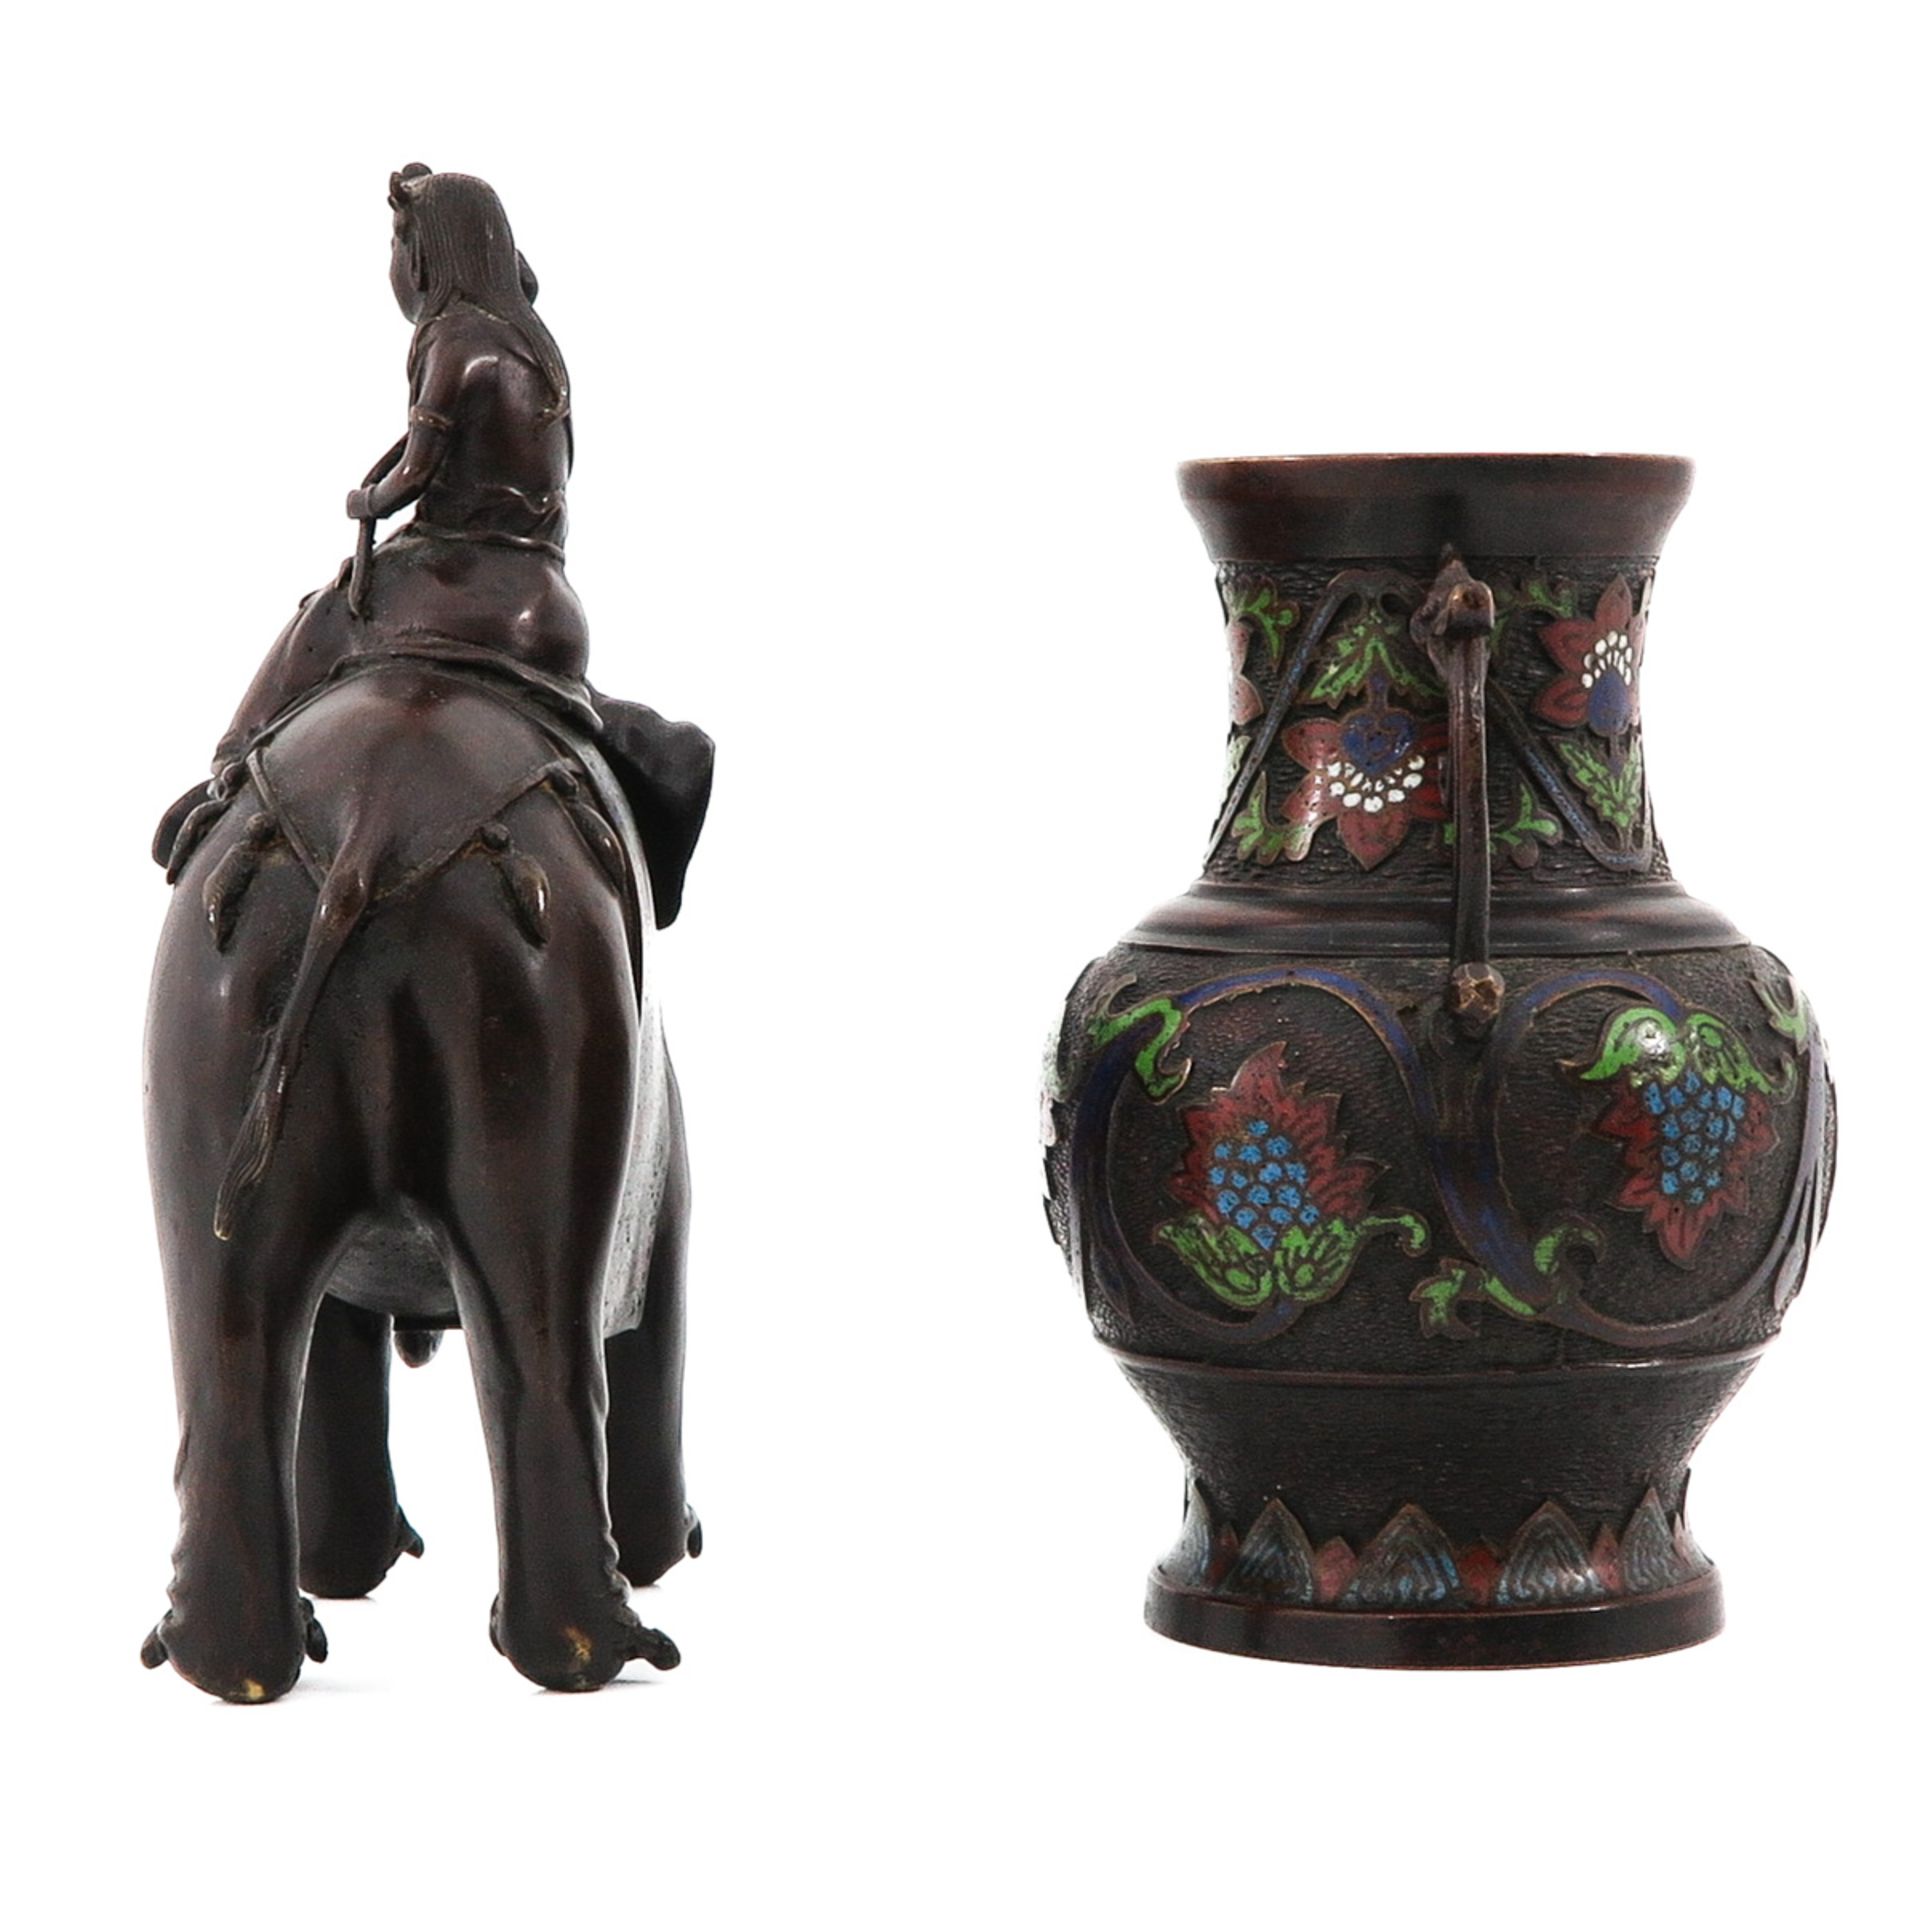 A Cloisonne Sculpture and Vase - Image 2 of 10